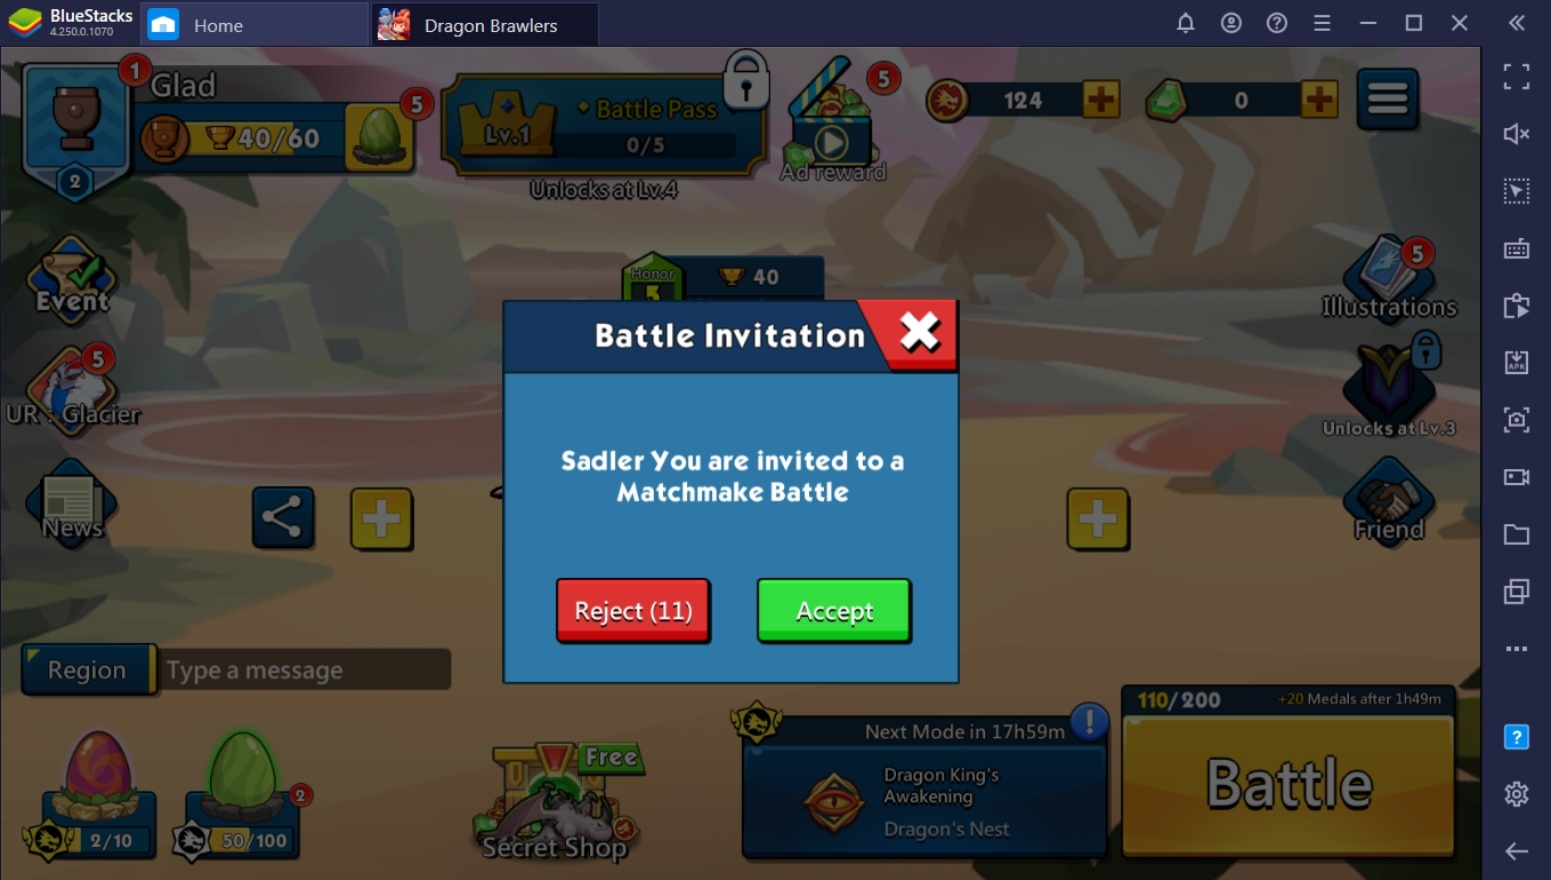 Tips and Tricks To Win More in Dragon Brawlers